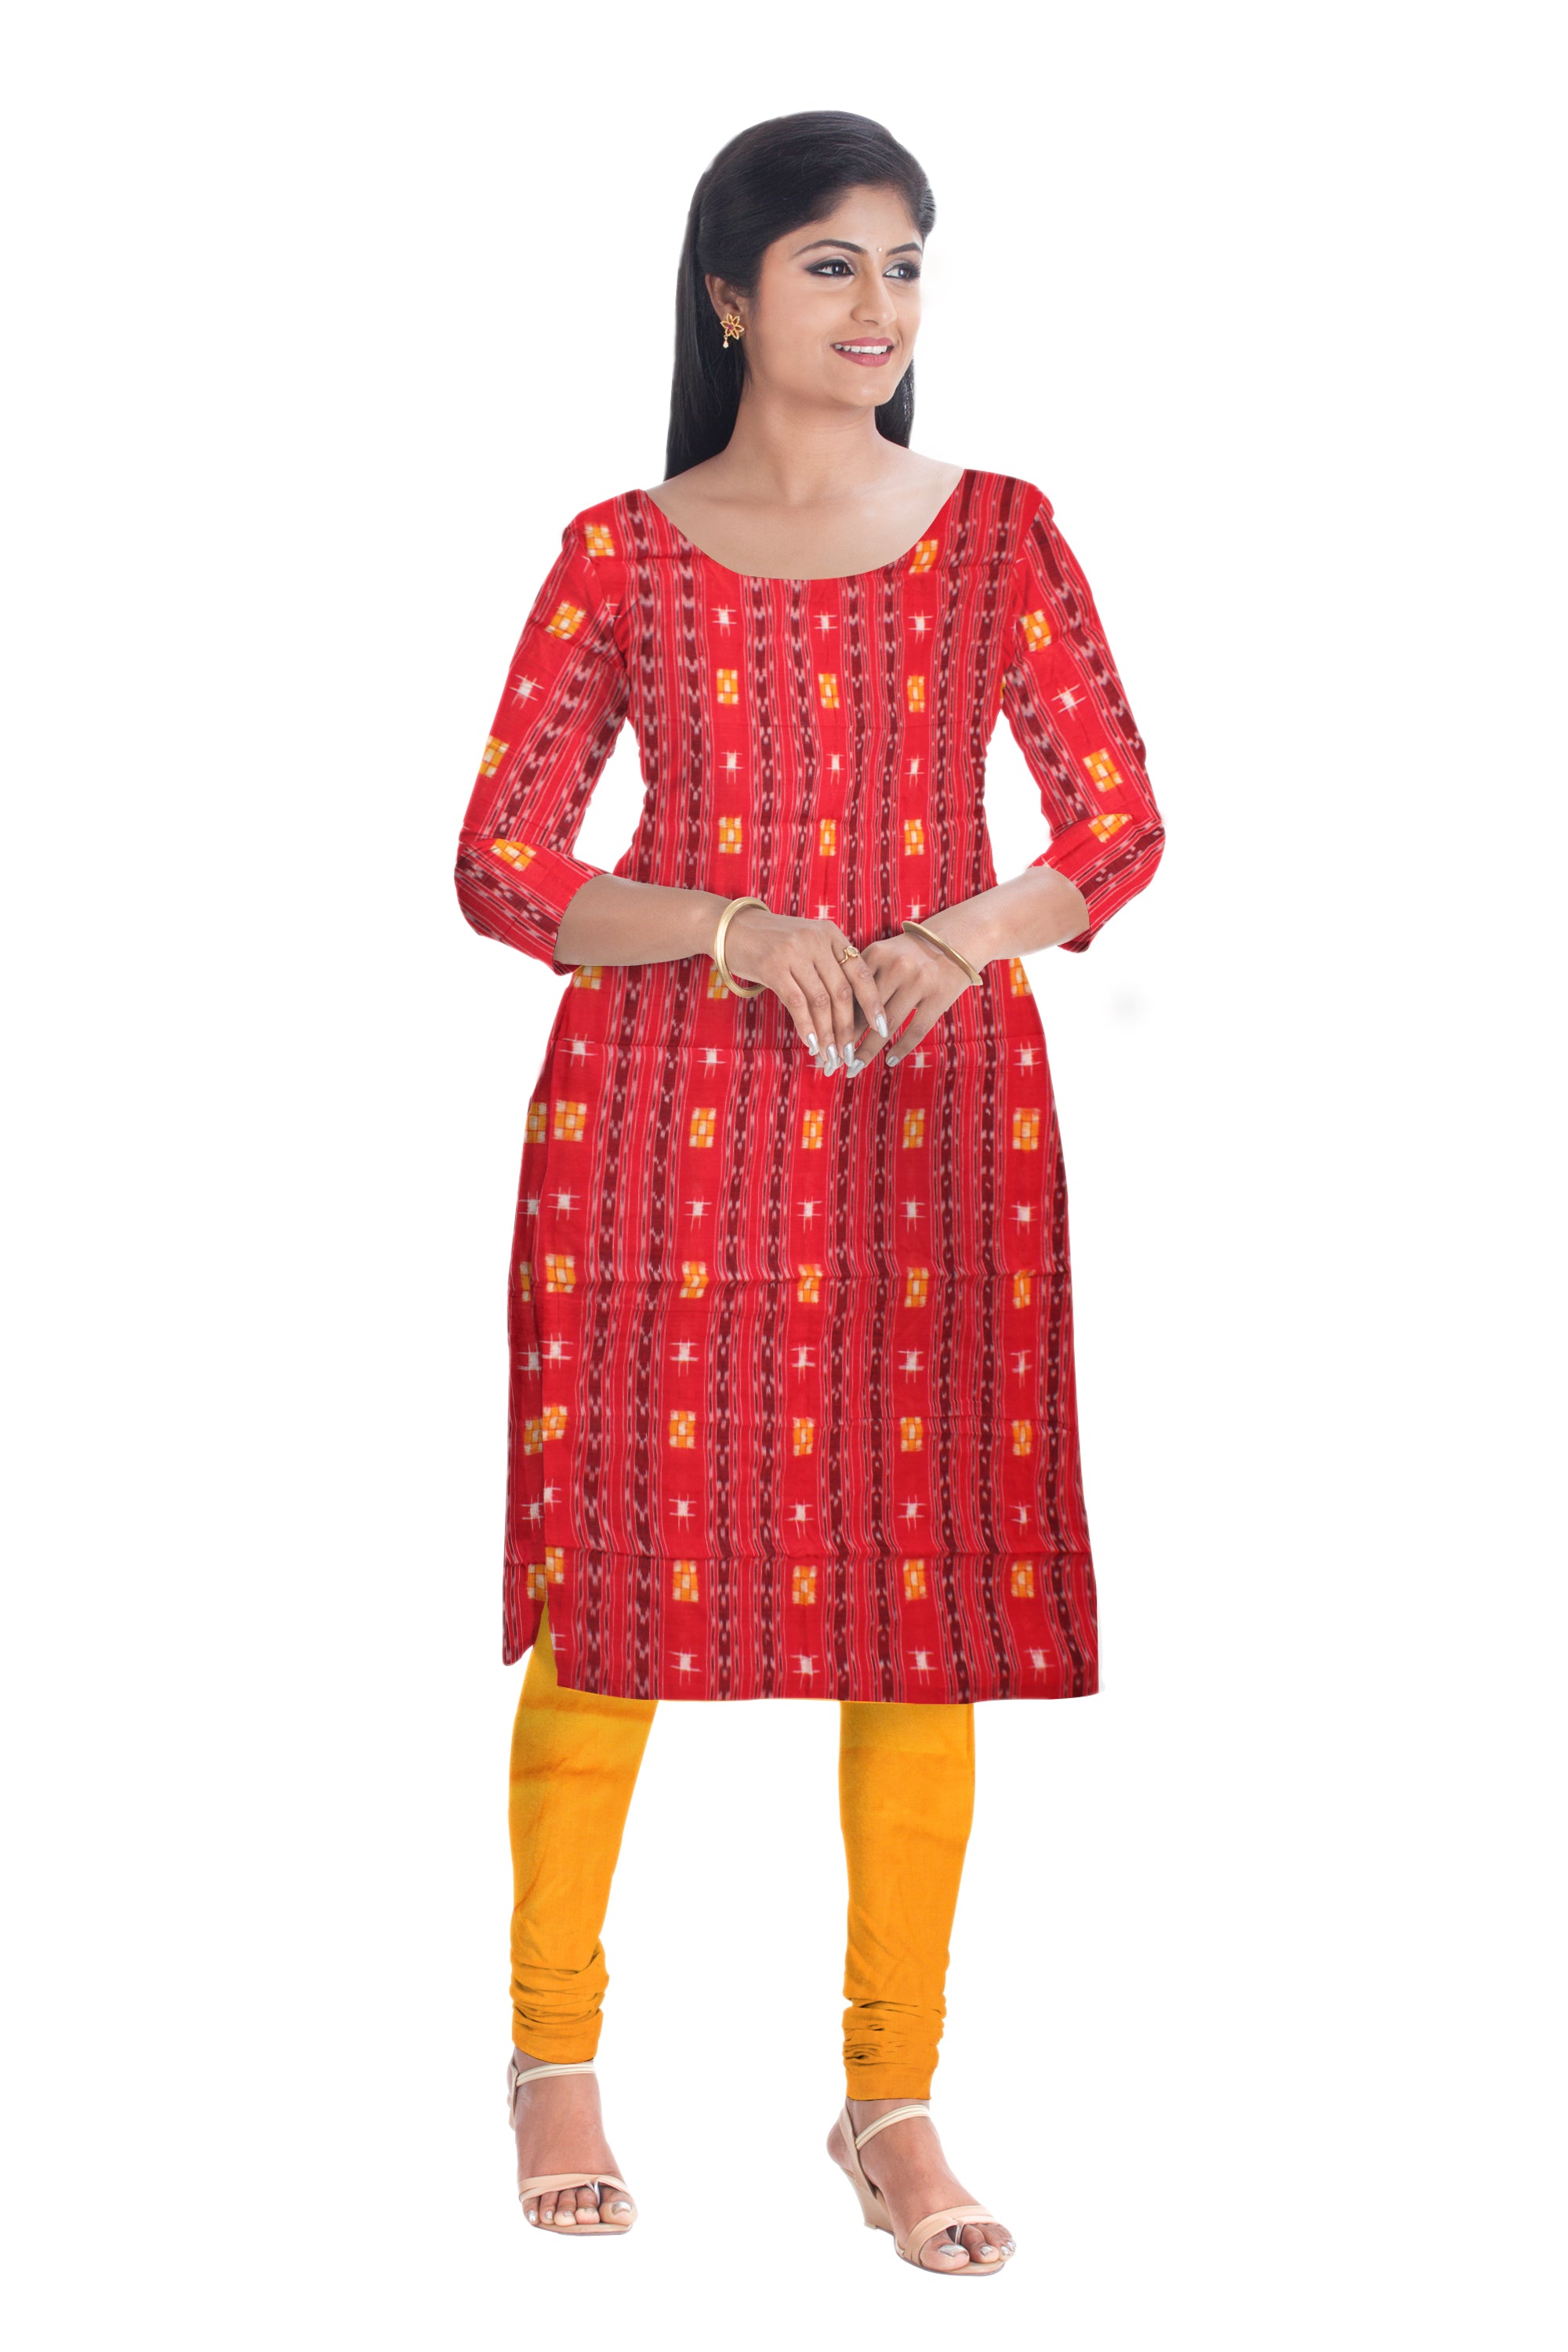 Cotton Dress Material in Beautiful White, Orange and Yellow color with Pasapali design. Contrast Dupatta  UNSTITCHED DRESS SET - Koshali Arts & Crafts Enterprise